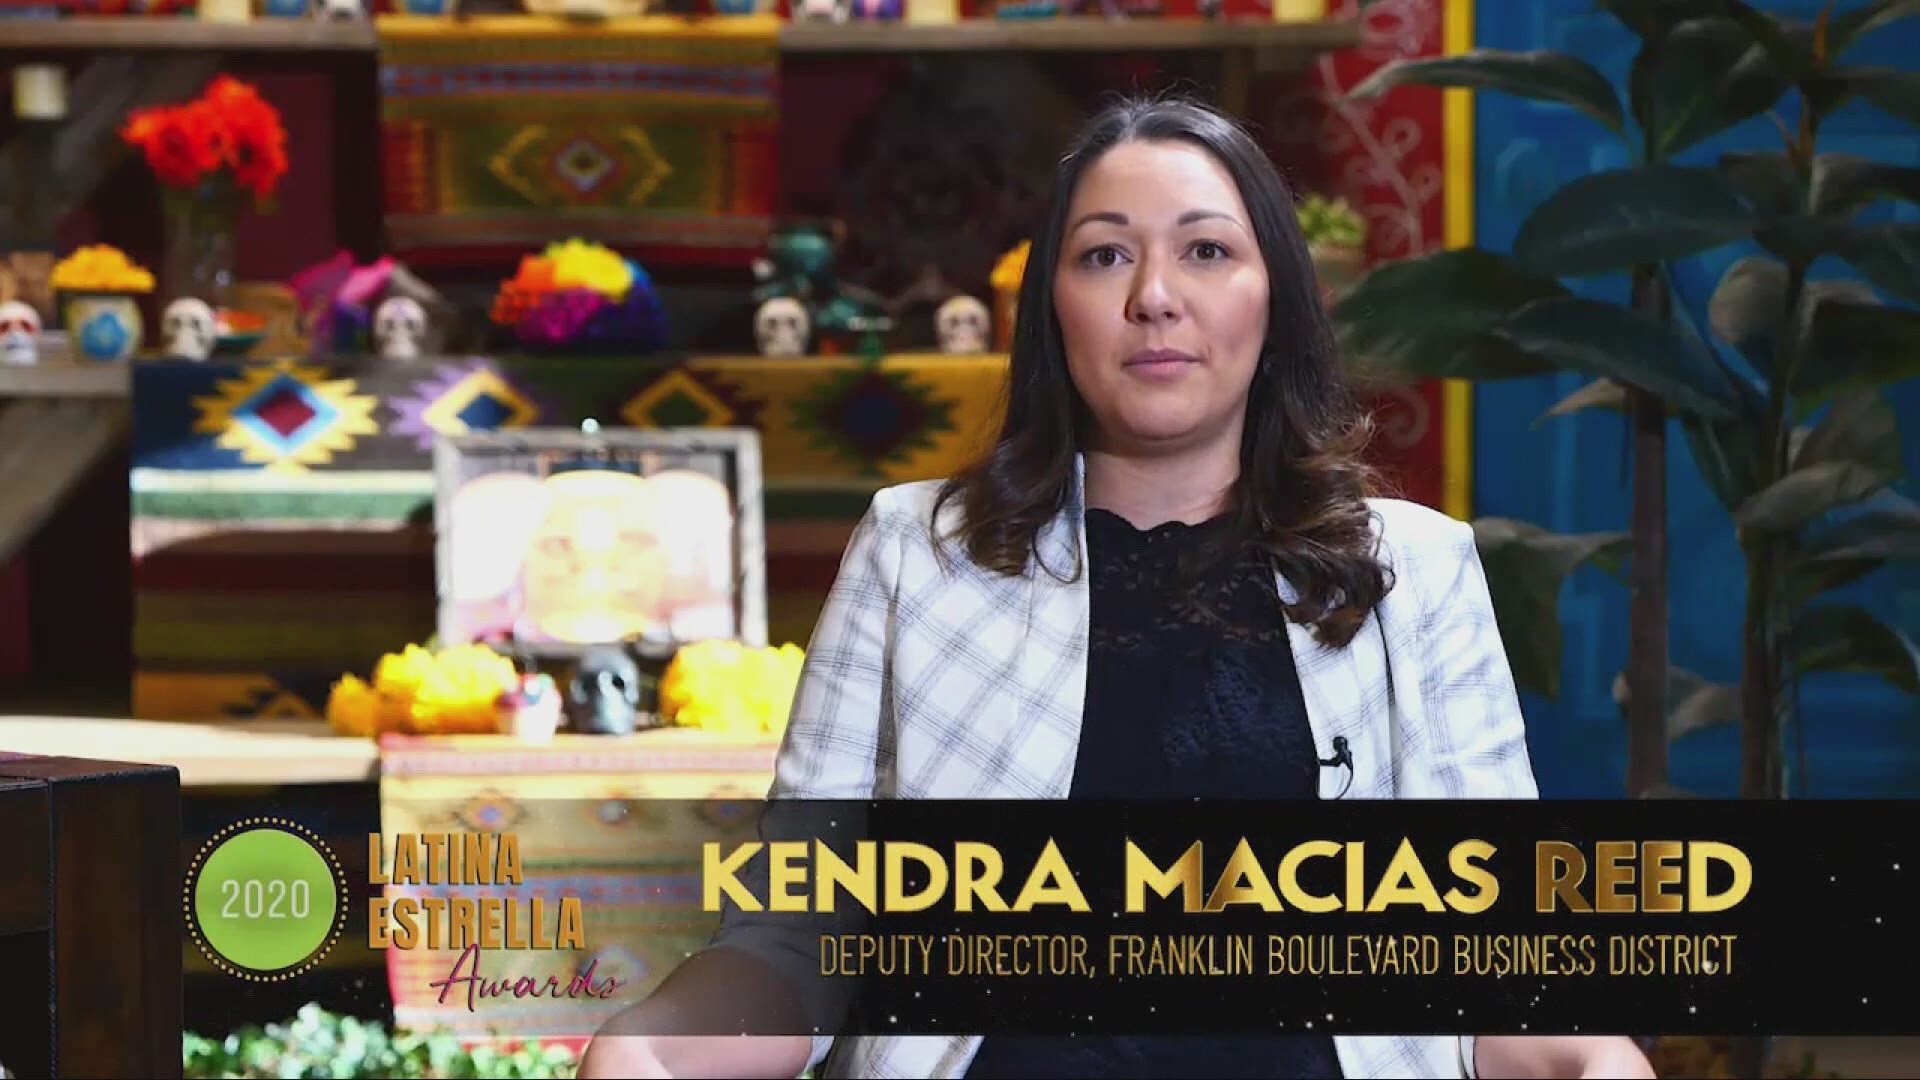 Latina trailblazers are paving the way in the community, like Kendra Macias Reed. This segment was paid for by the Sacramento Hispanic Chamber of Commerce